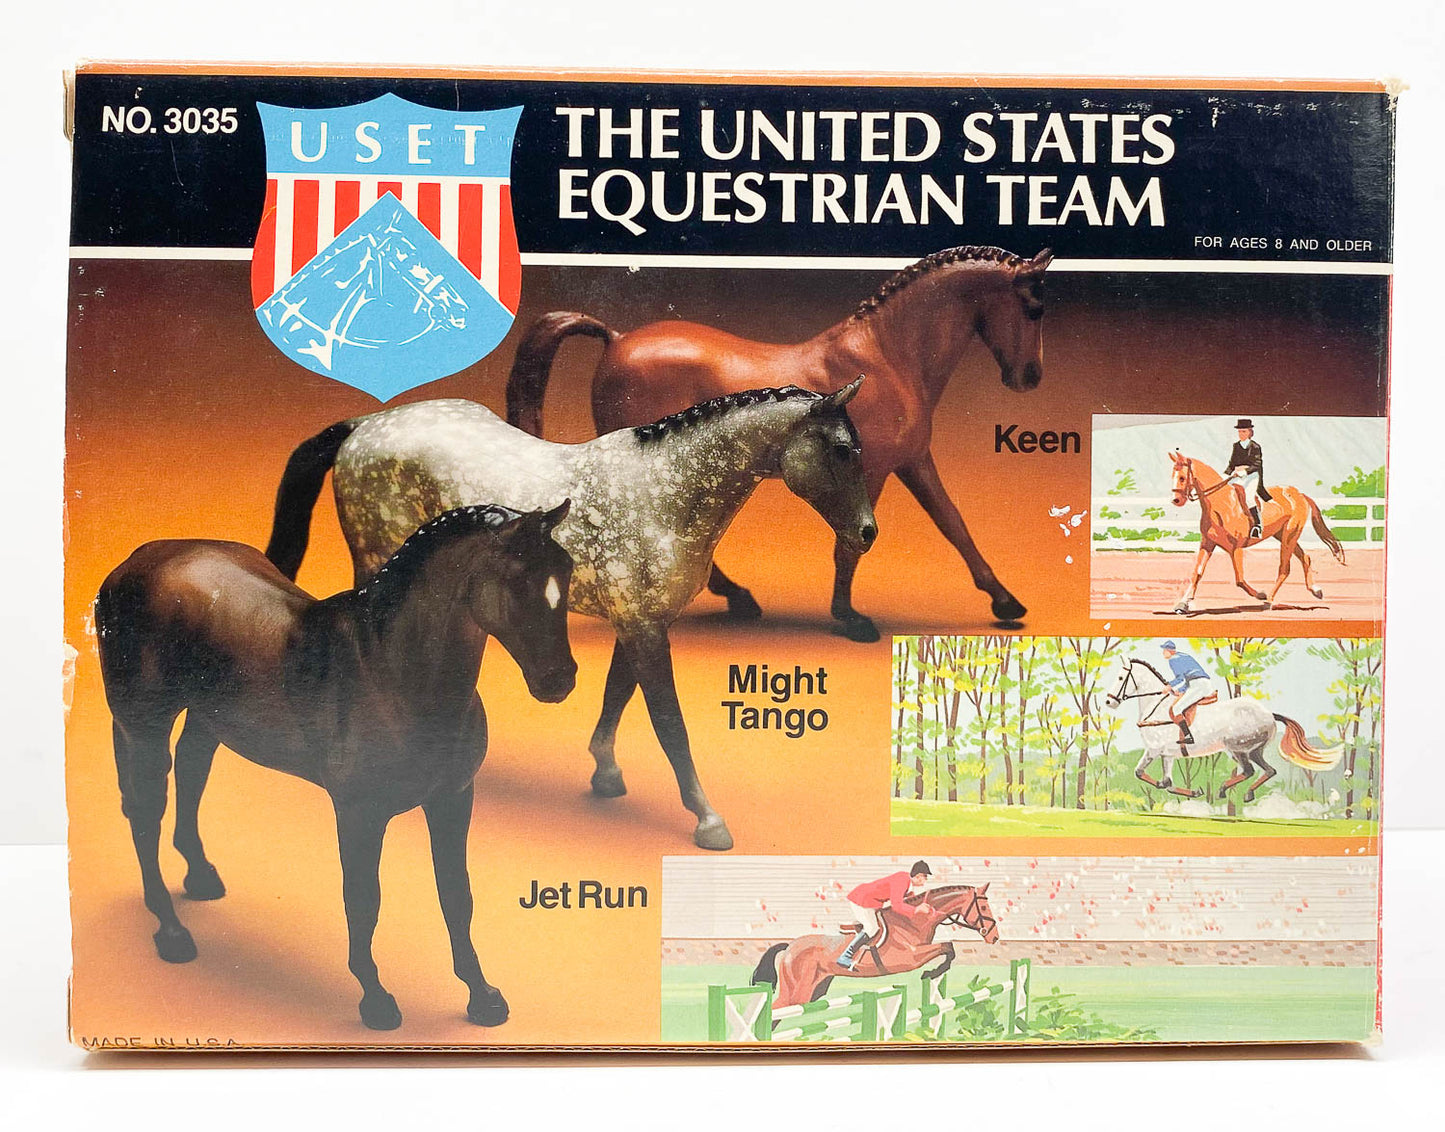 US Equestrian Team: Jet Run, Might Tango and Keen